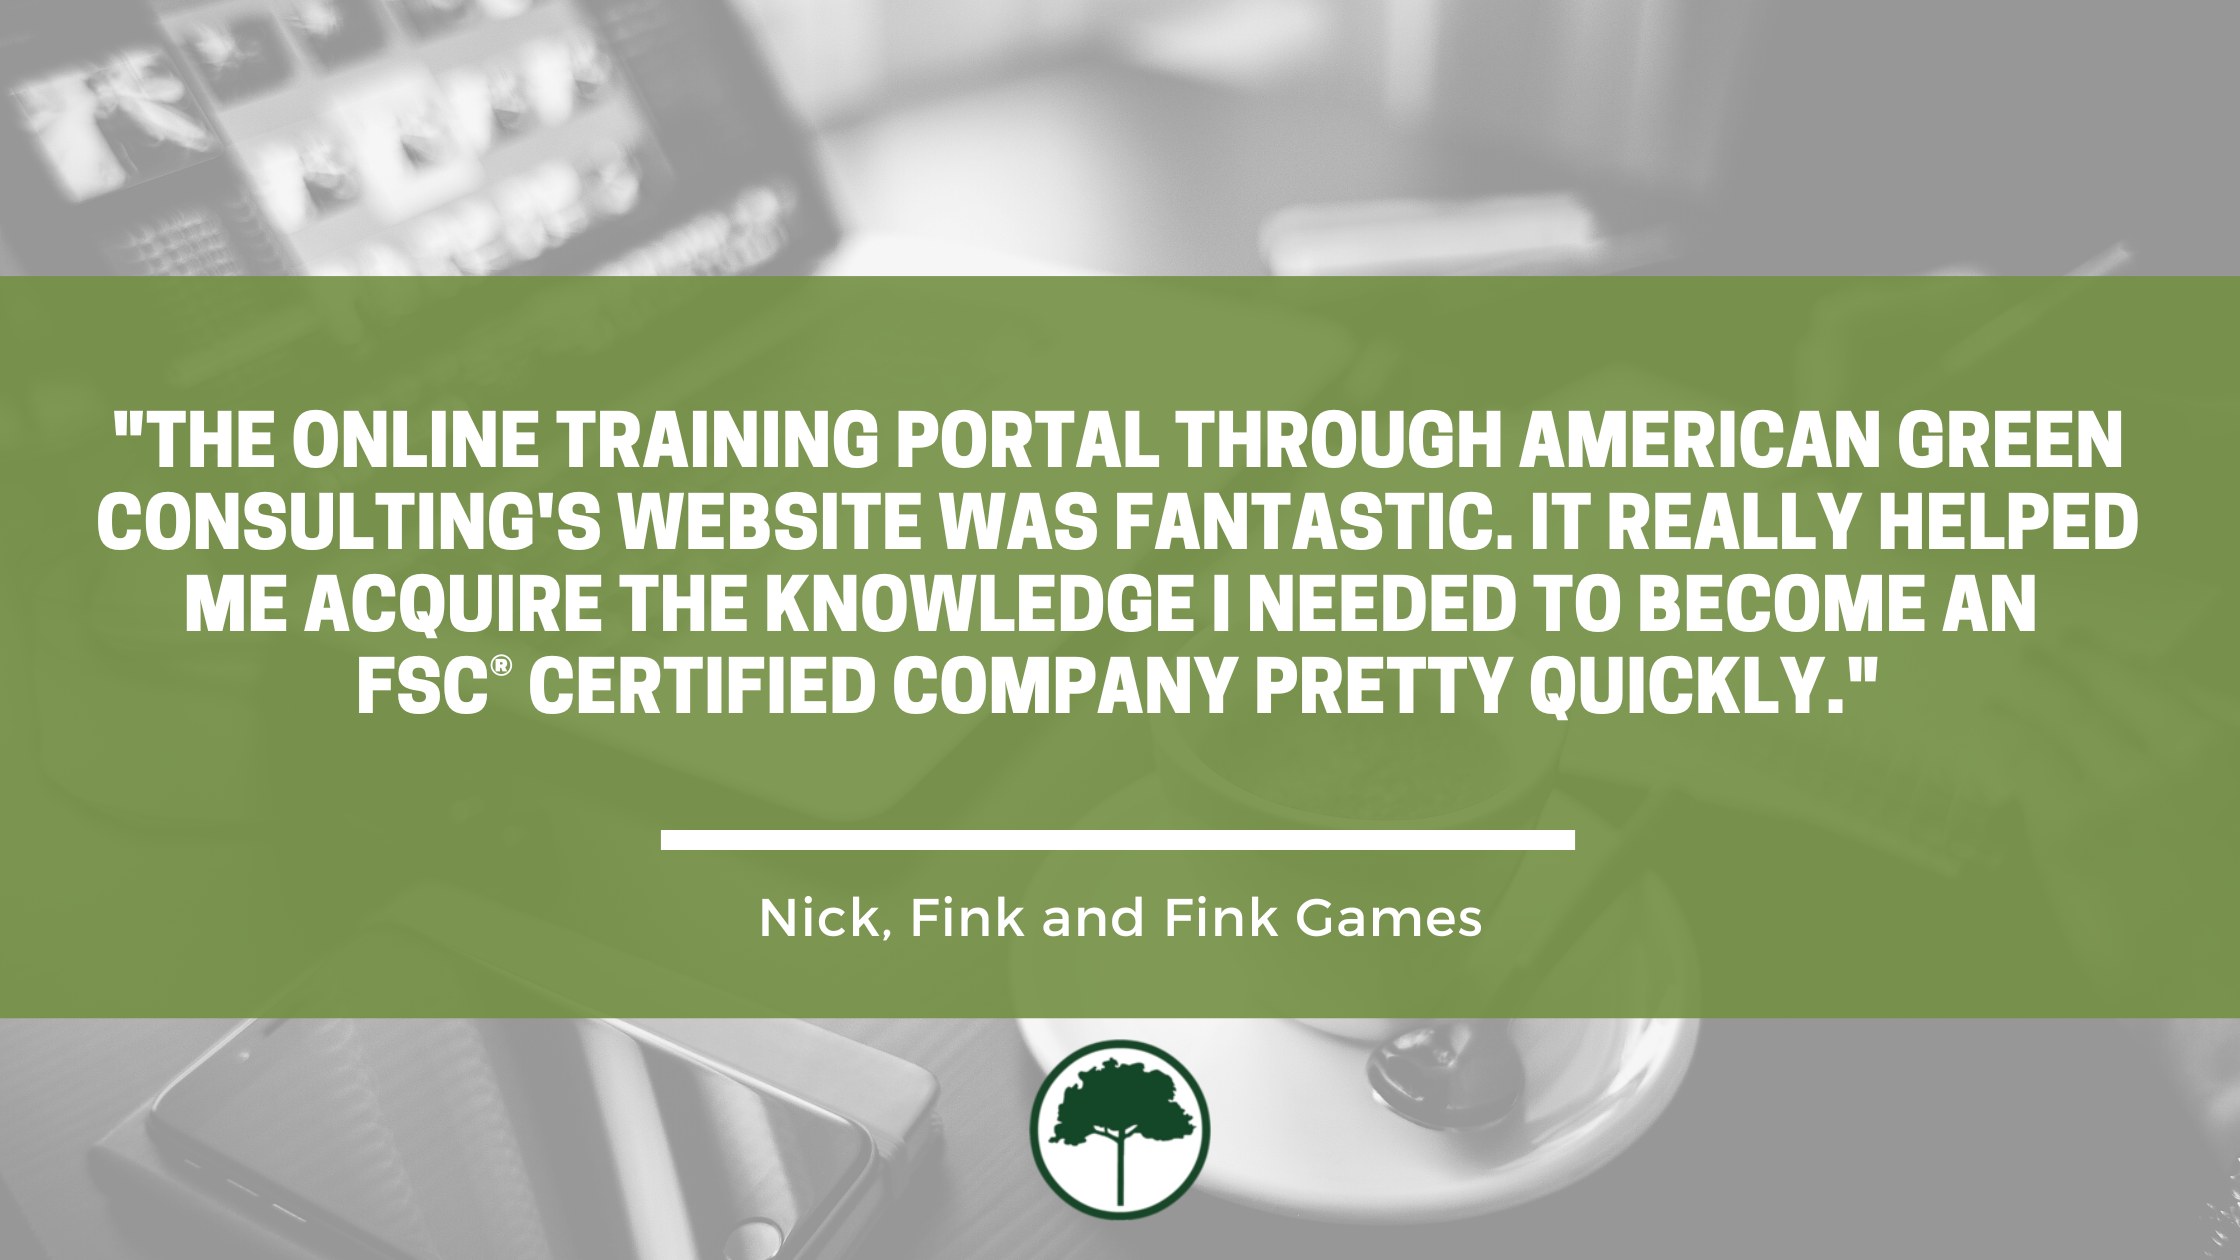 Testimonial by Fink & Fink Games. Full text reads: "The online training portal through American Green Consulting’s website was fantastic. It really helped me acquire the knowledge I needed to become an FSC certified company pretty quickly."